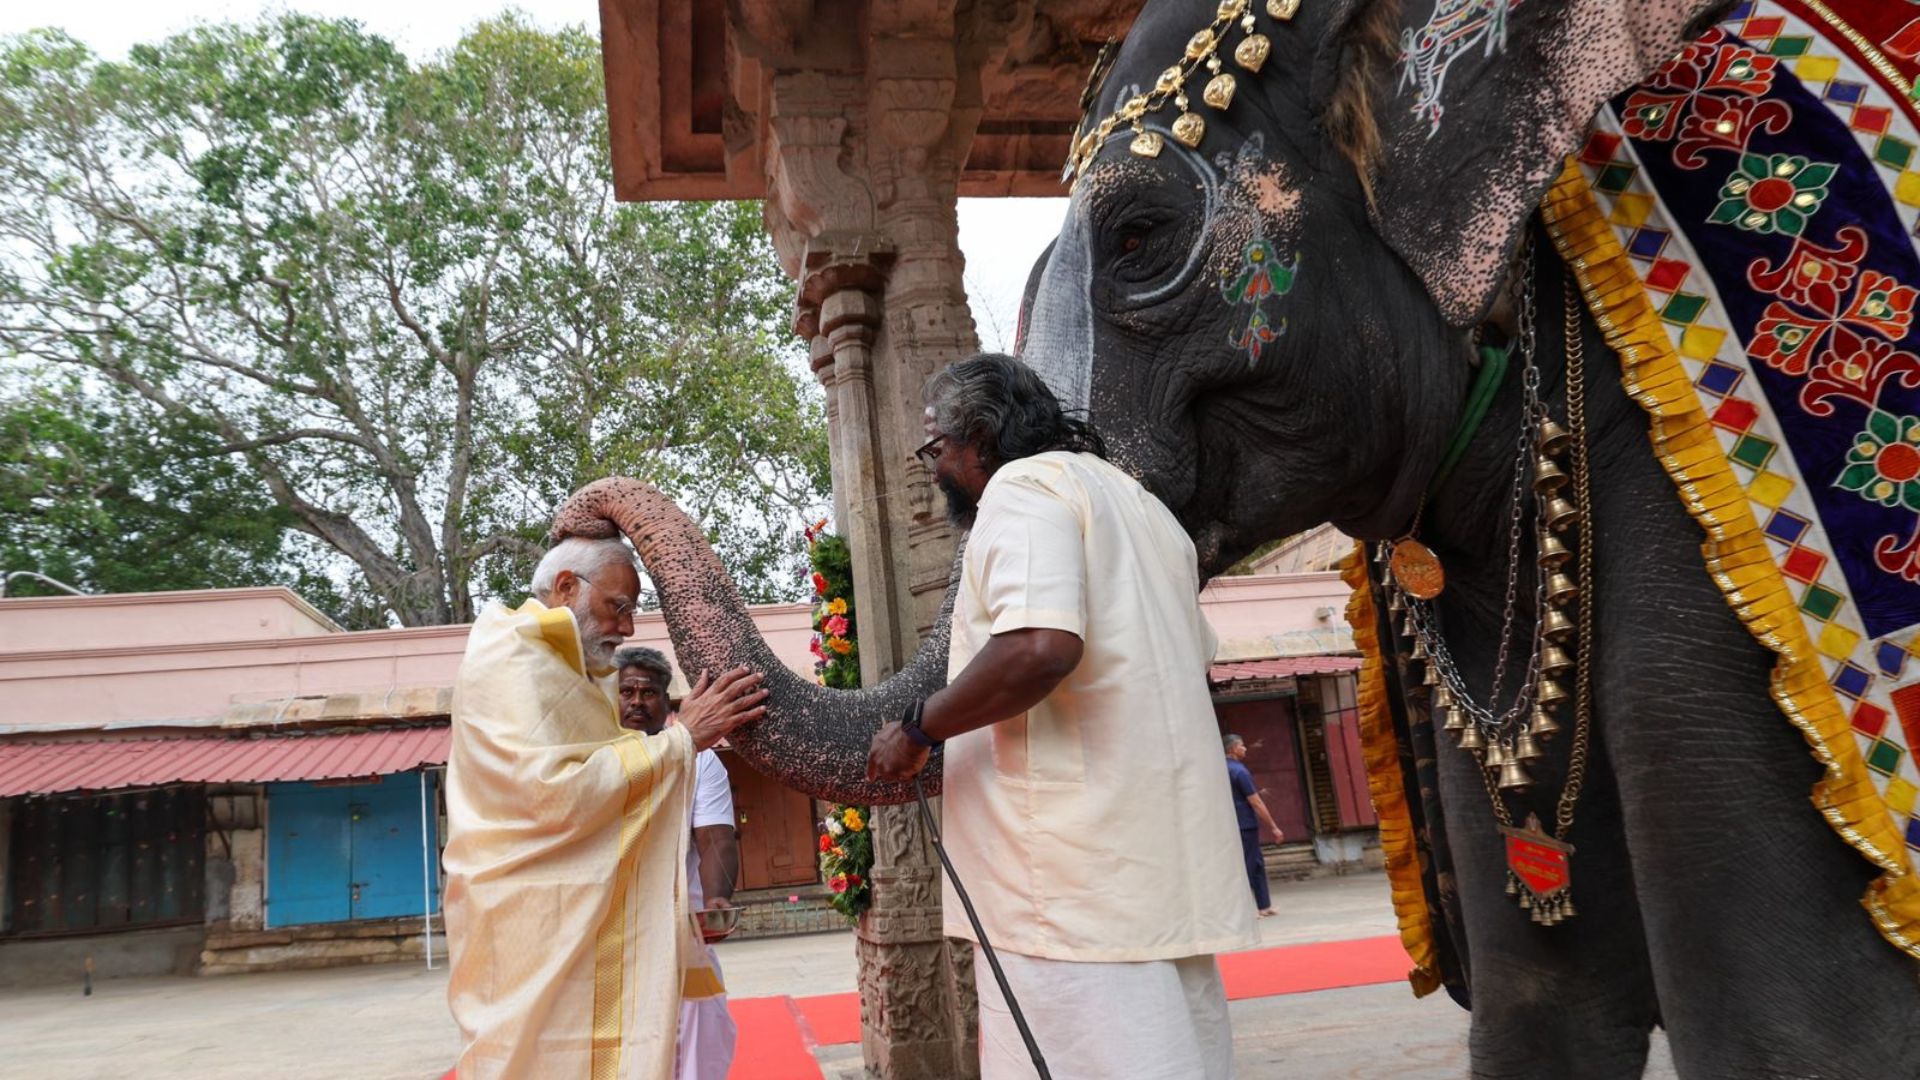 PM Modi Holds Roadshow, Takes Blessings From Elephant